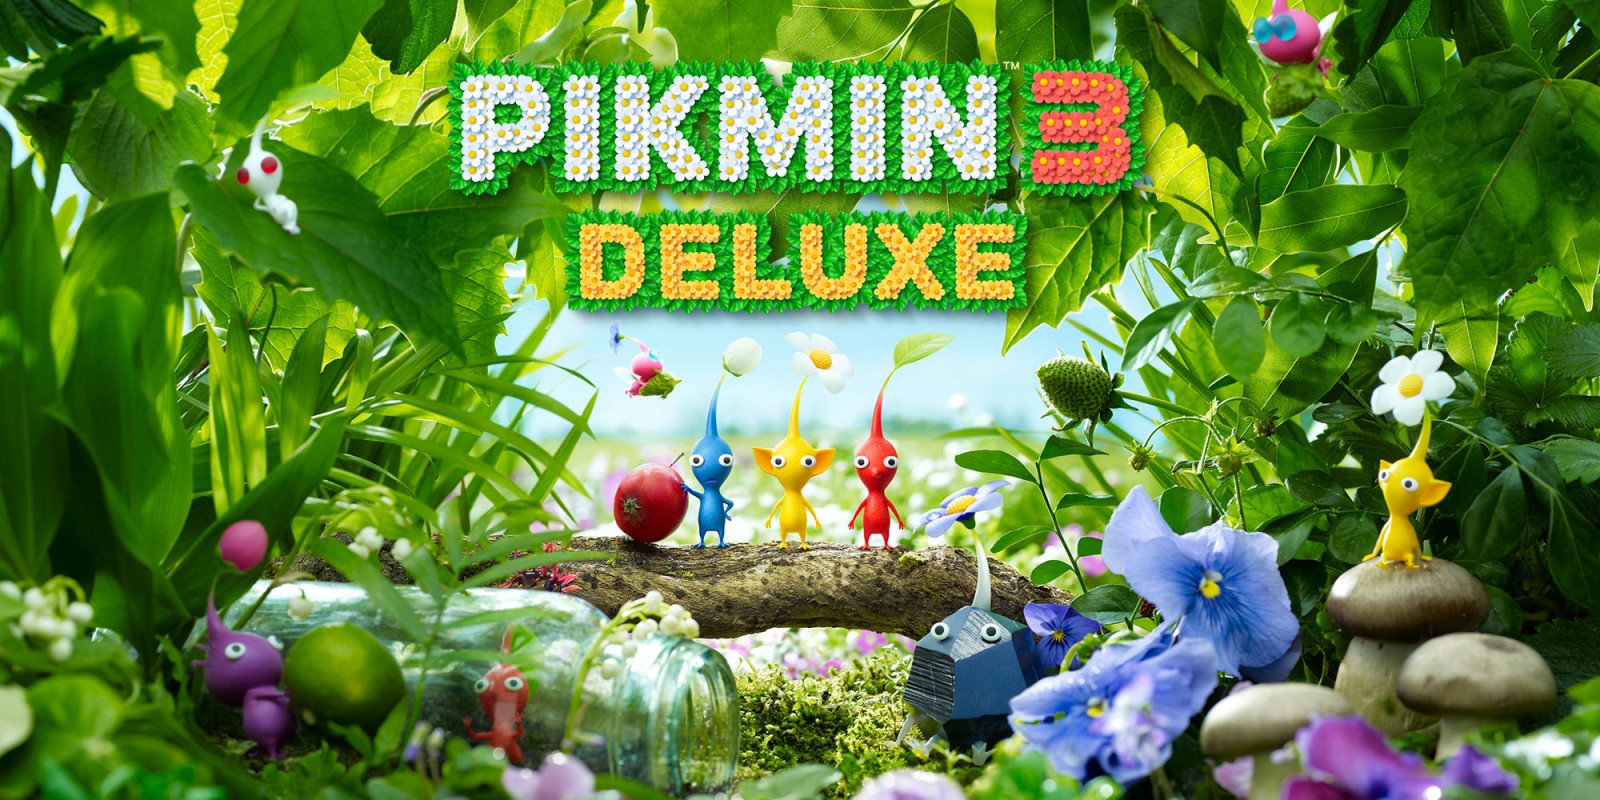 H2x1_NSwitch_Pikmin3Deluxe_image1600w.jpg